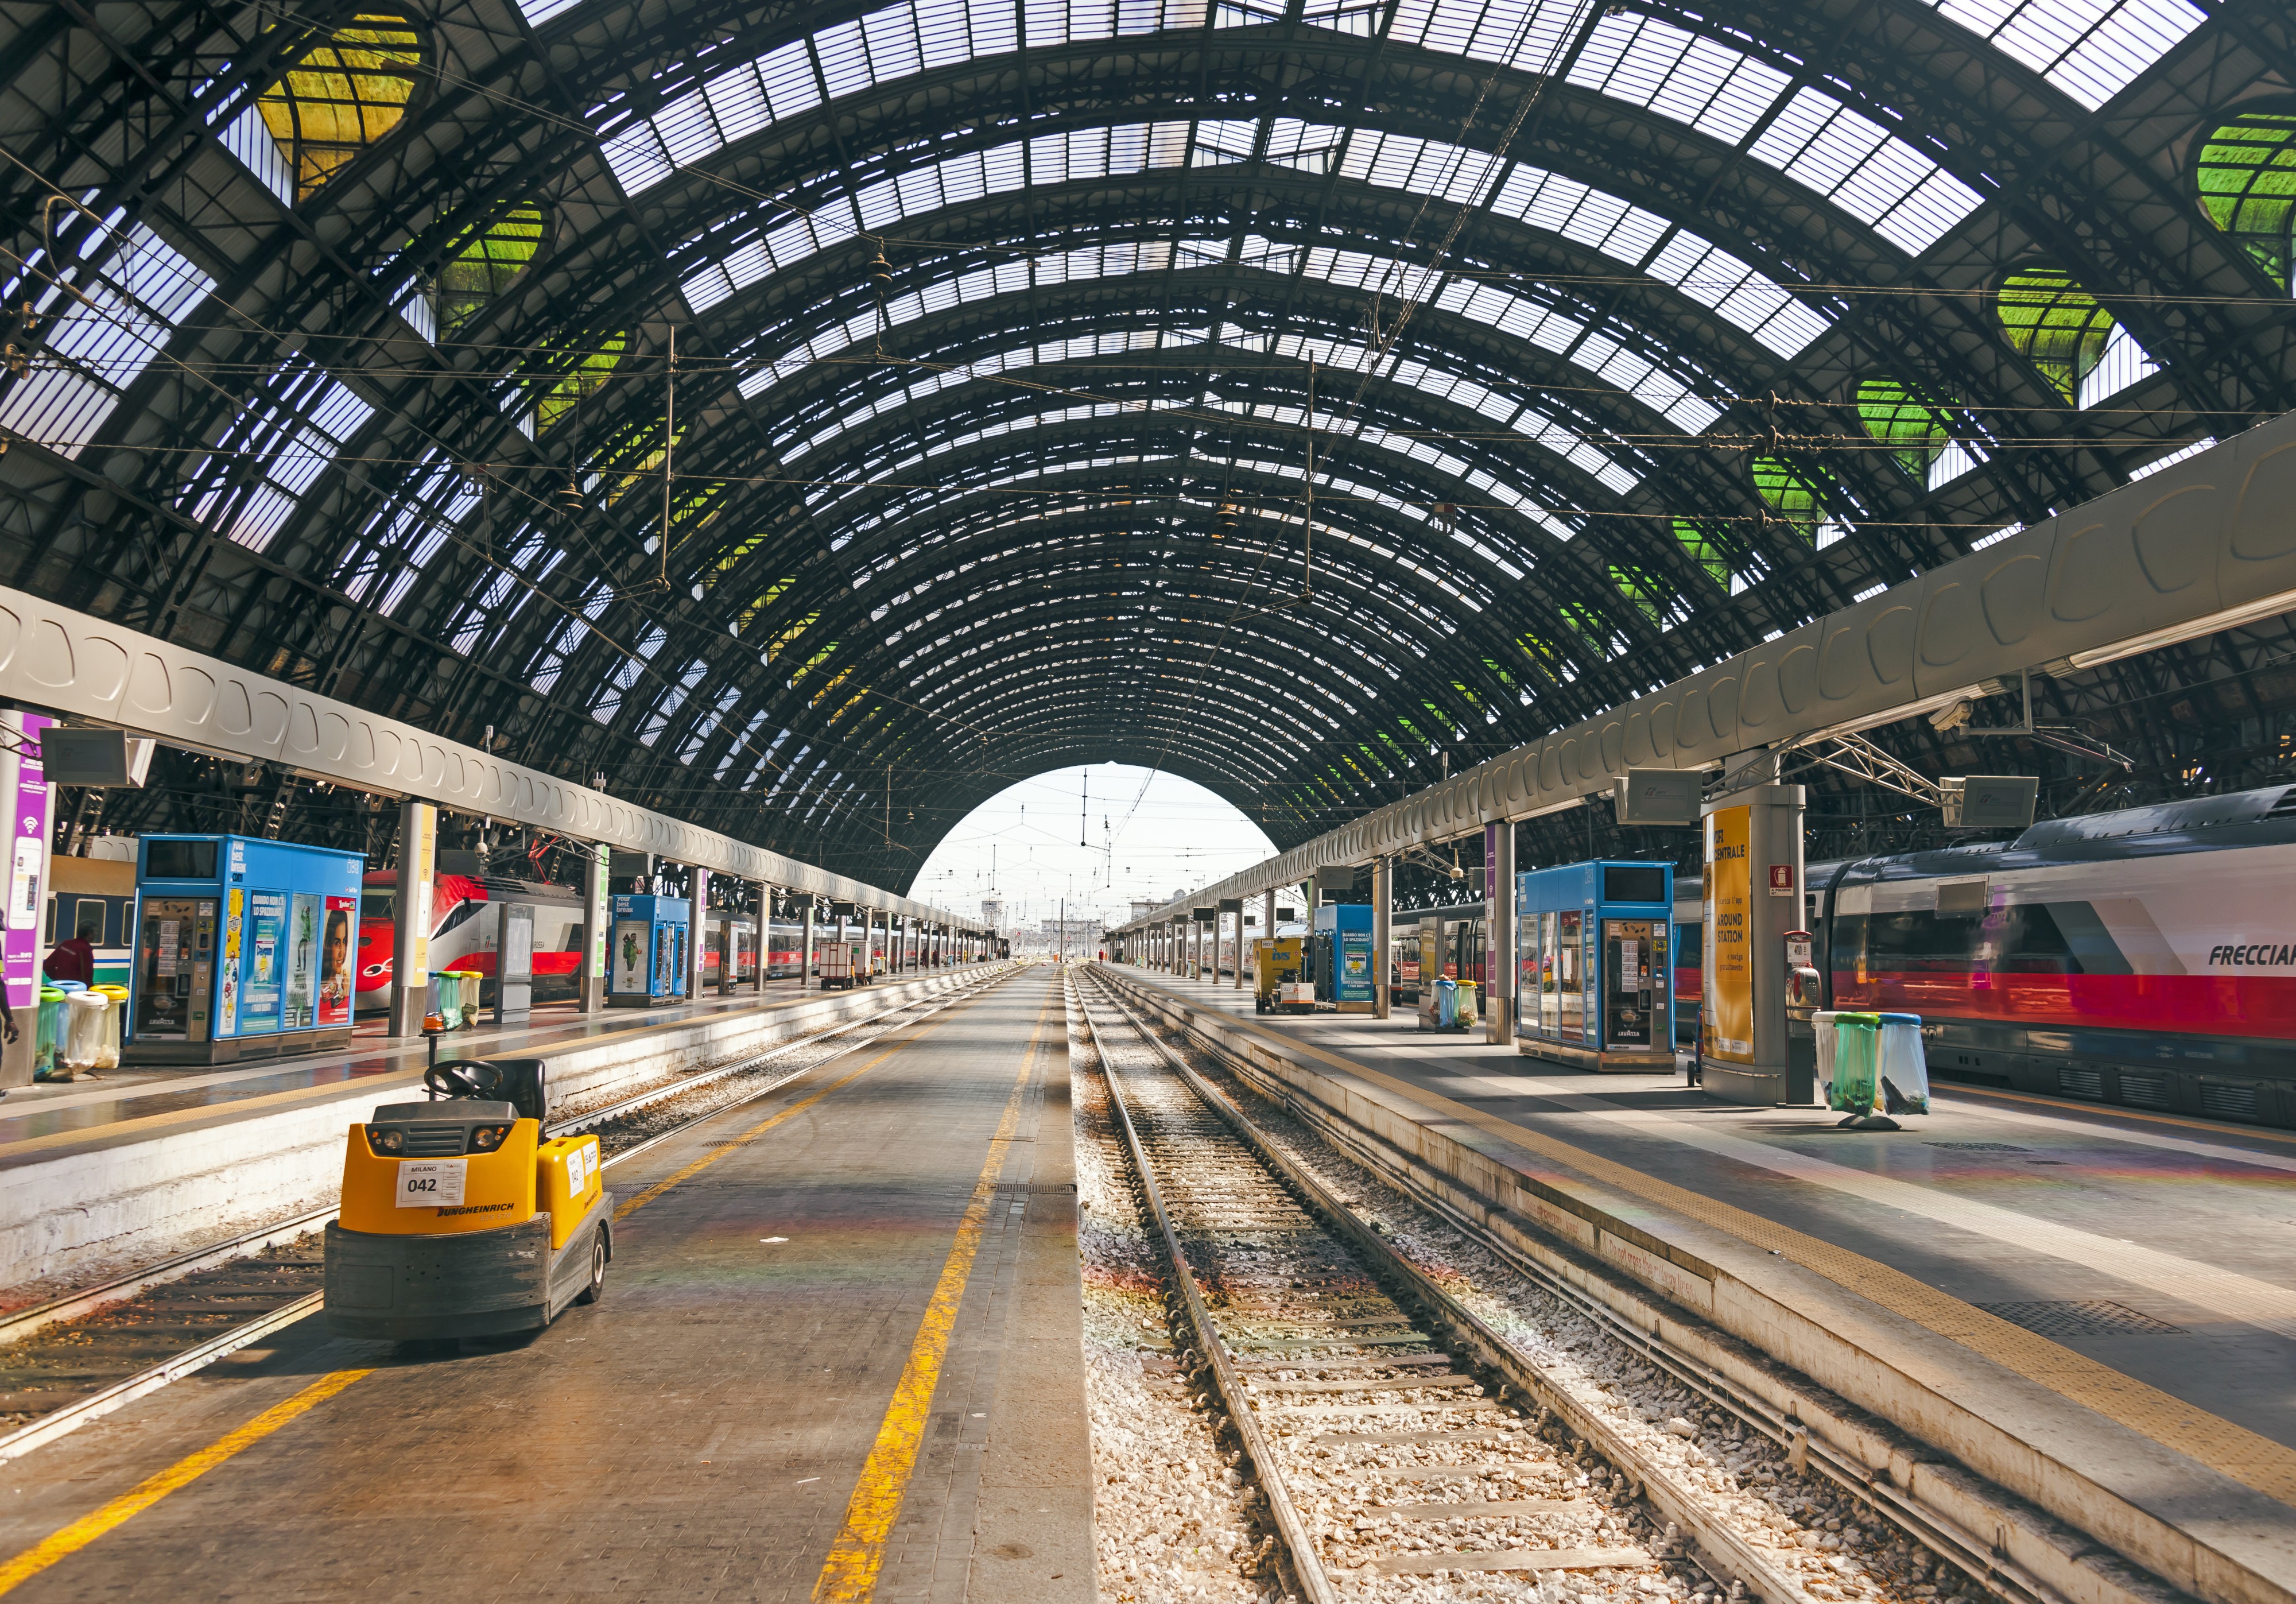 Platforms at Milano Centrale Stazione central trainshed